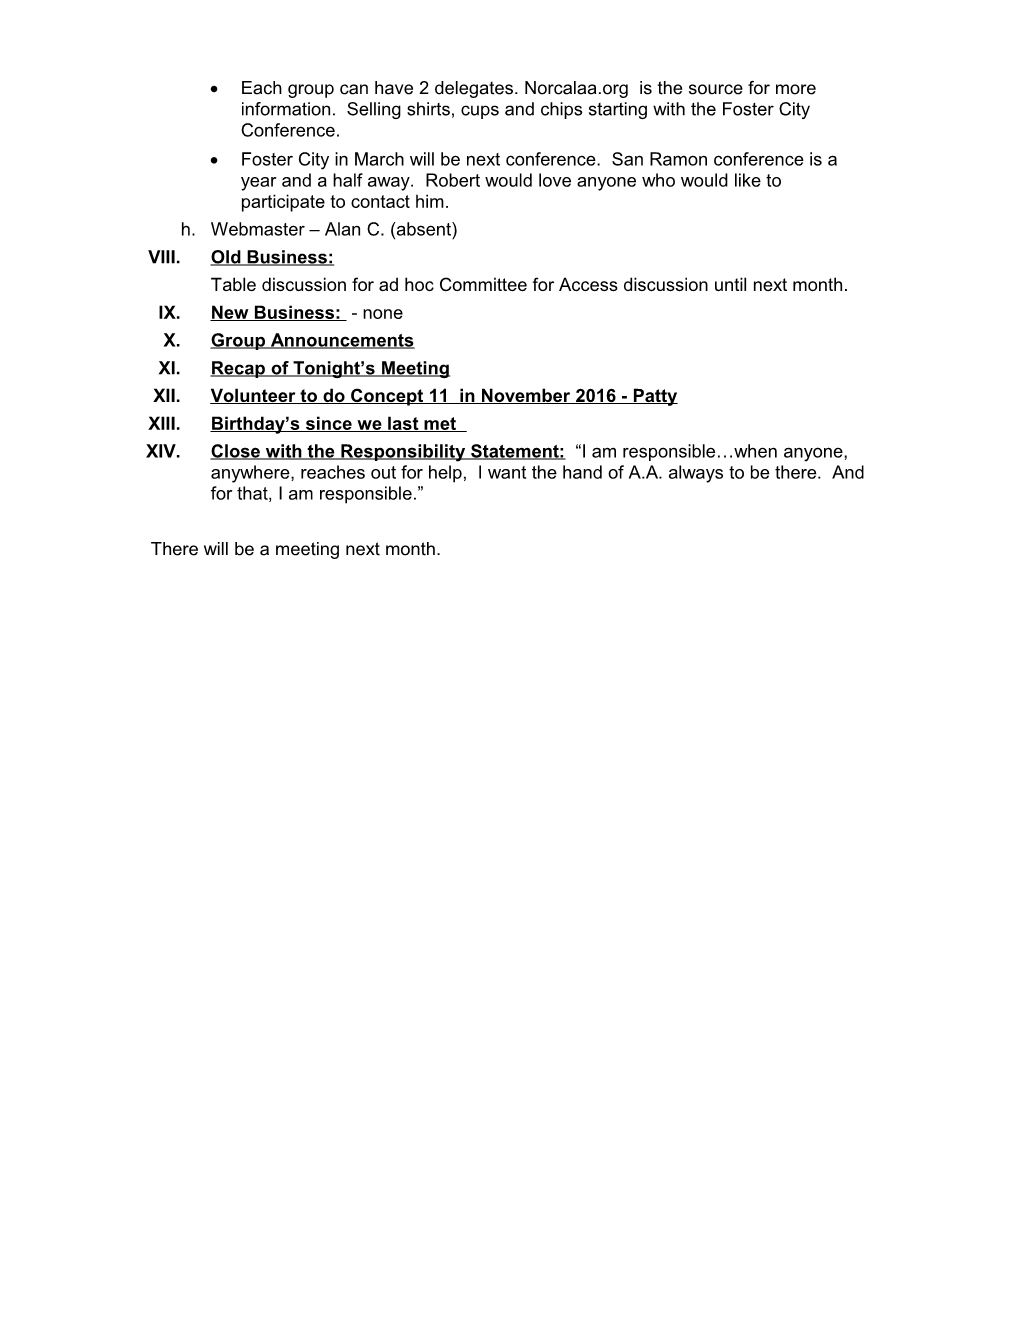 Valley Intergroup Agenda for October 4Th, 2010